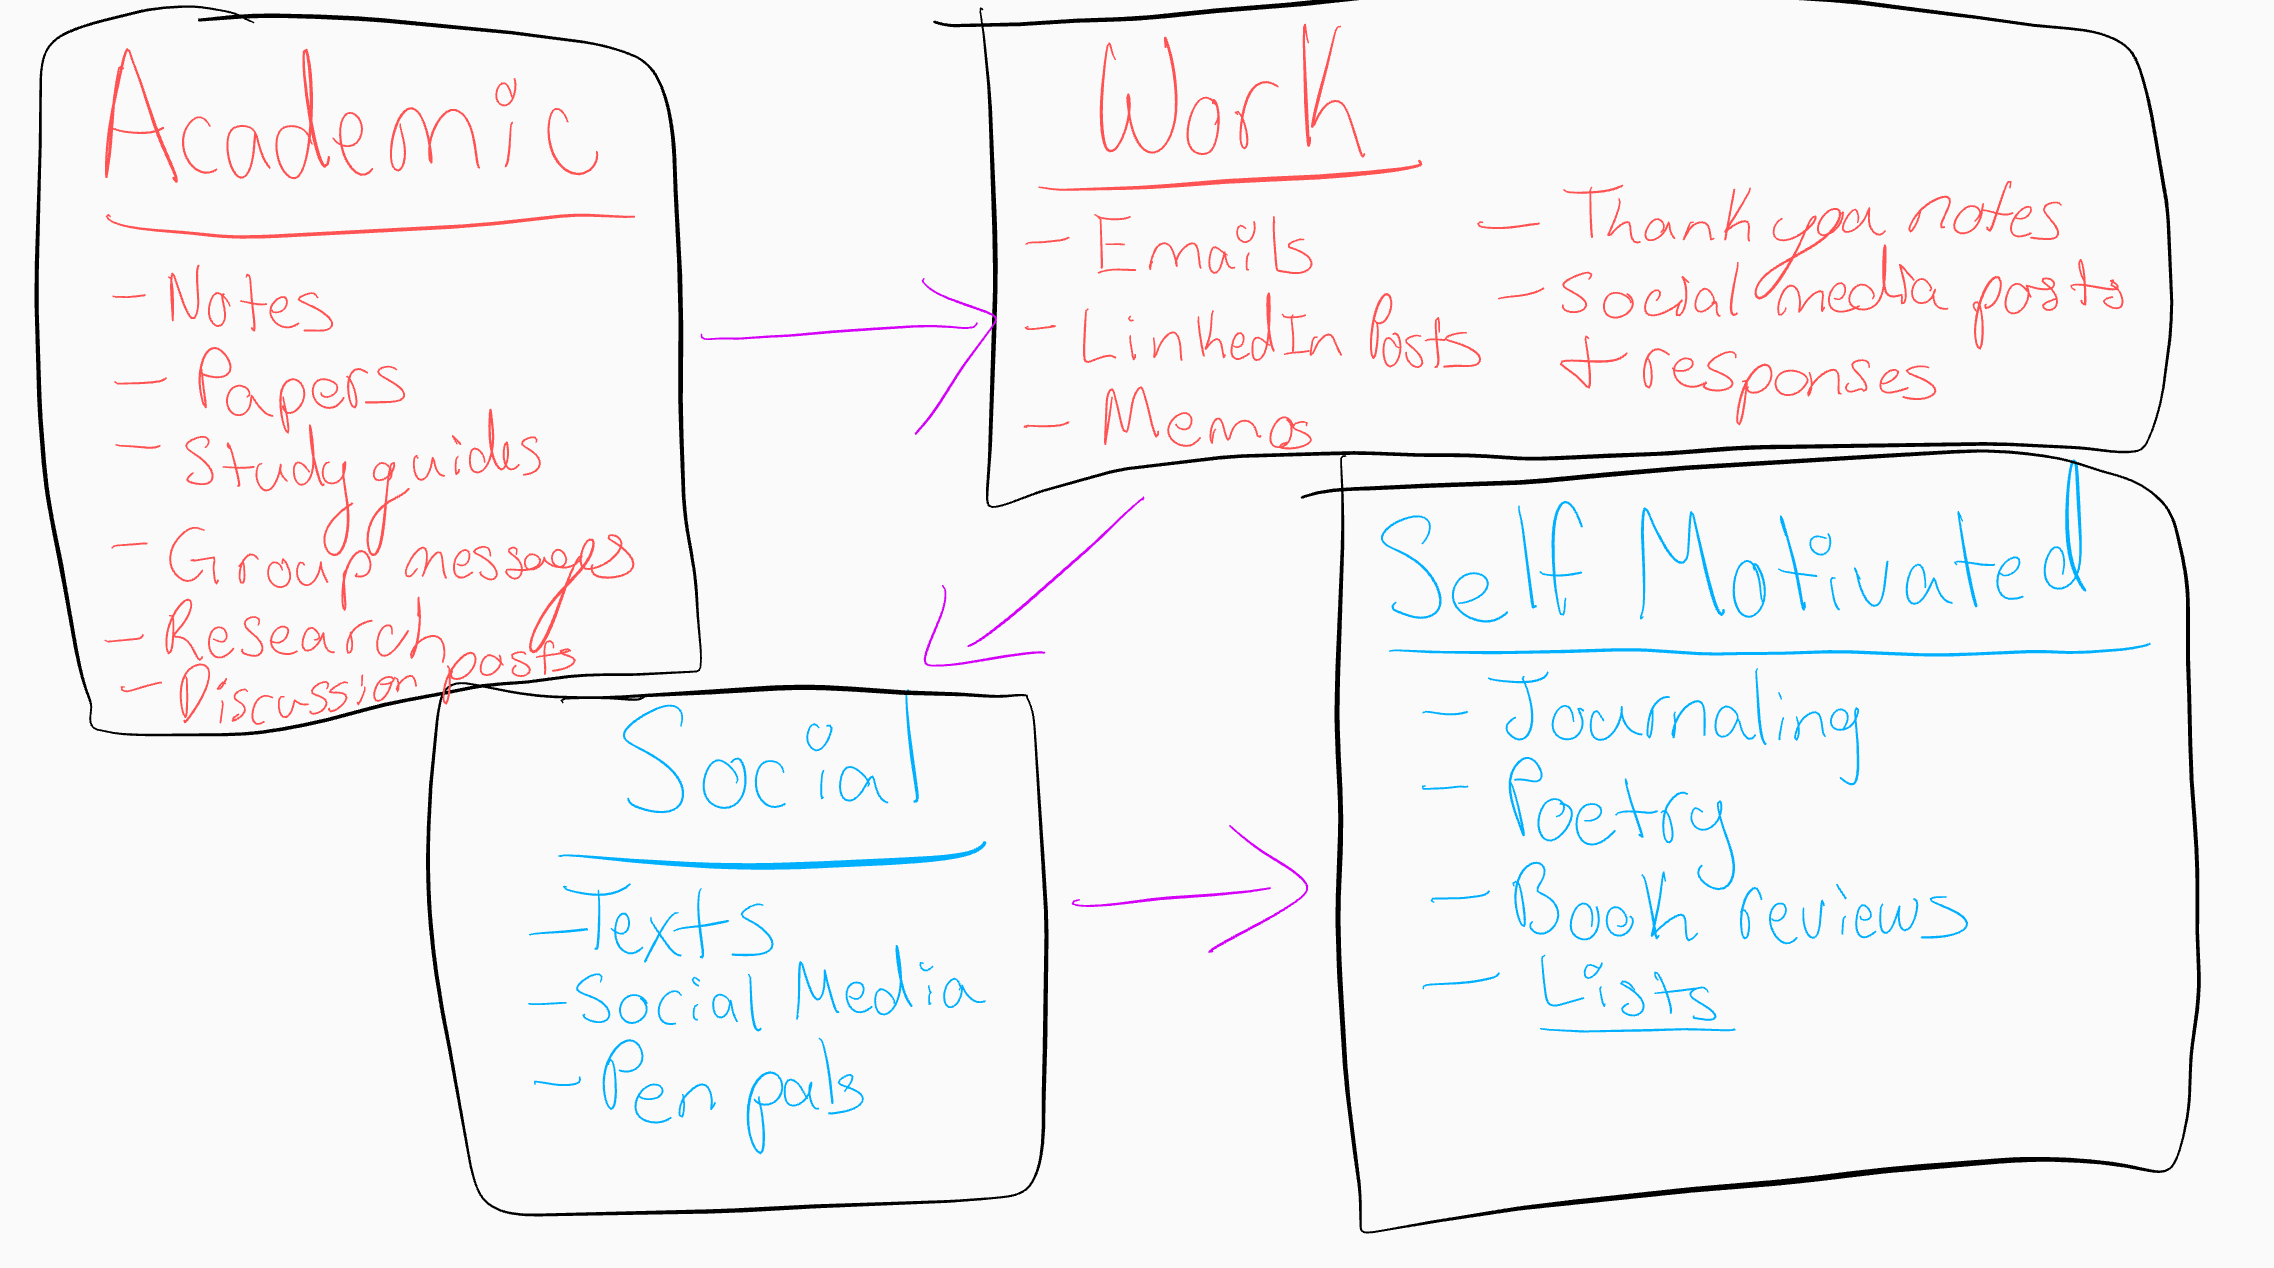 Rebecca's initial map including four differently sized black rectangles with colored labels: two spheres on the top of the page in 'serious' red, academic and work; and two below them in 'lighter' blue, social and self-motivated. Purple arrows point from academic to work, work to social, and social to self-motivated, indicating a hierarchy of seriousness. The self-motivated rectangle is the largest.